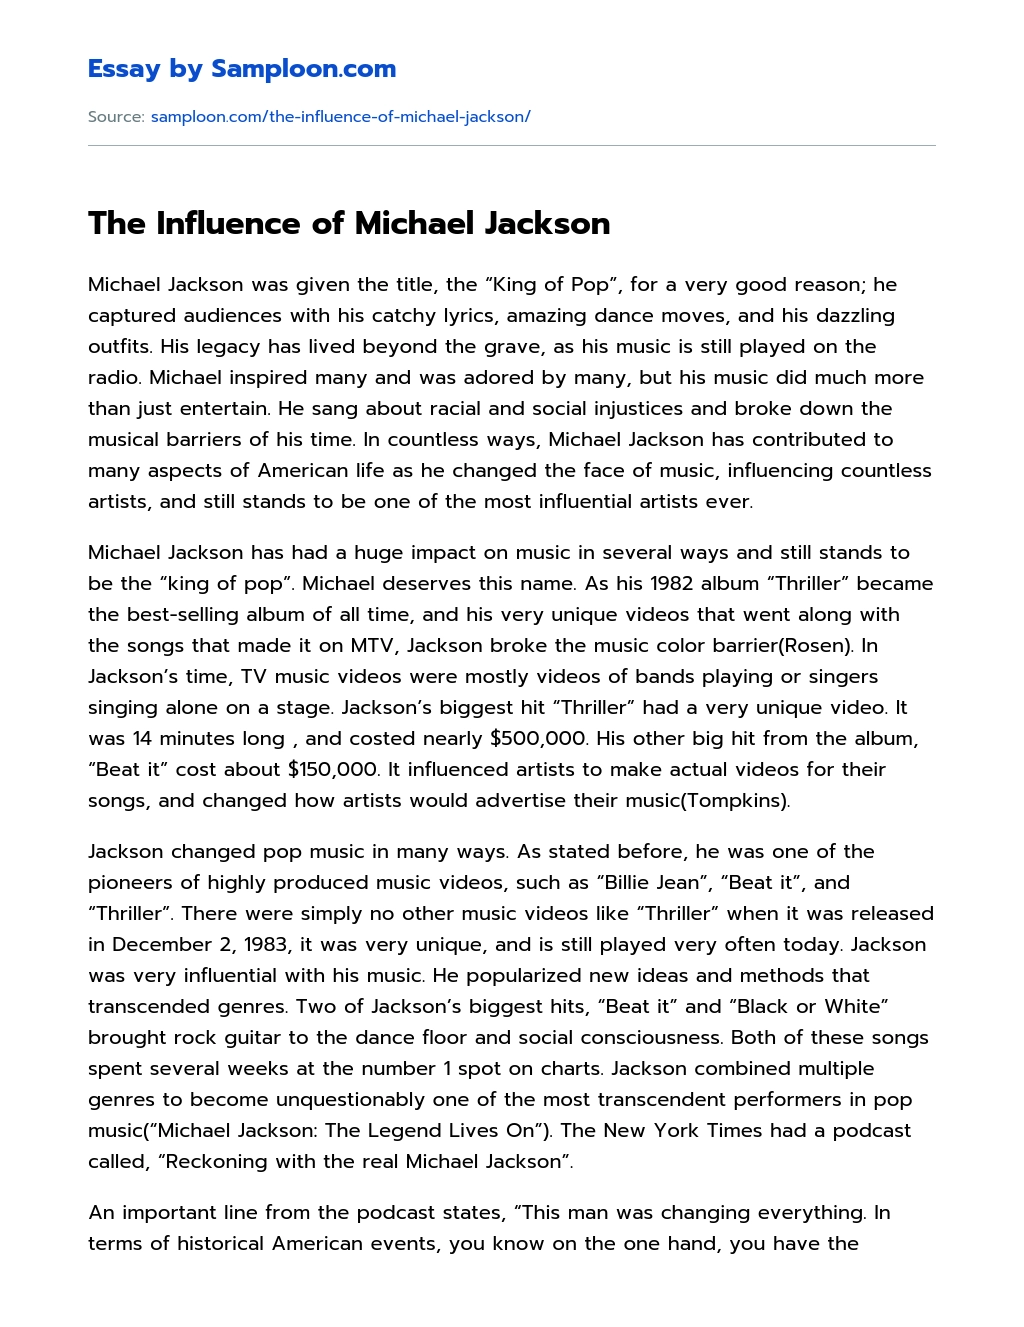 The Influence of Michael Jackson Research Paper essay